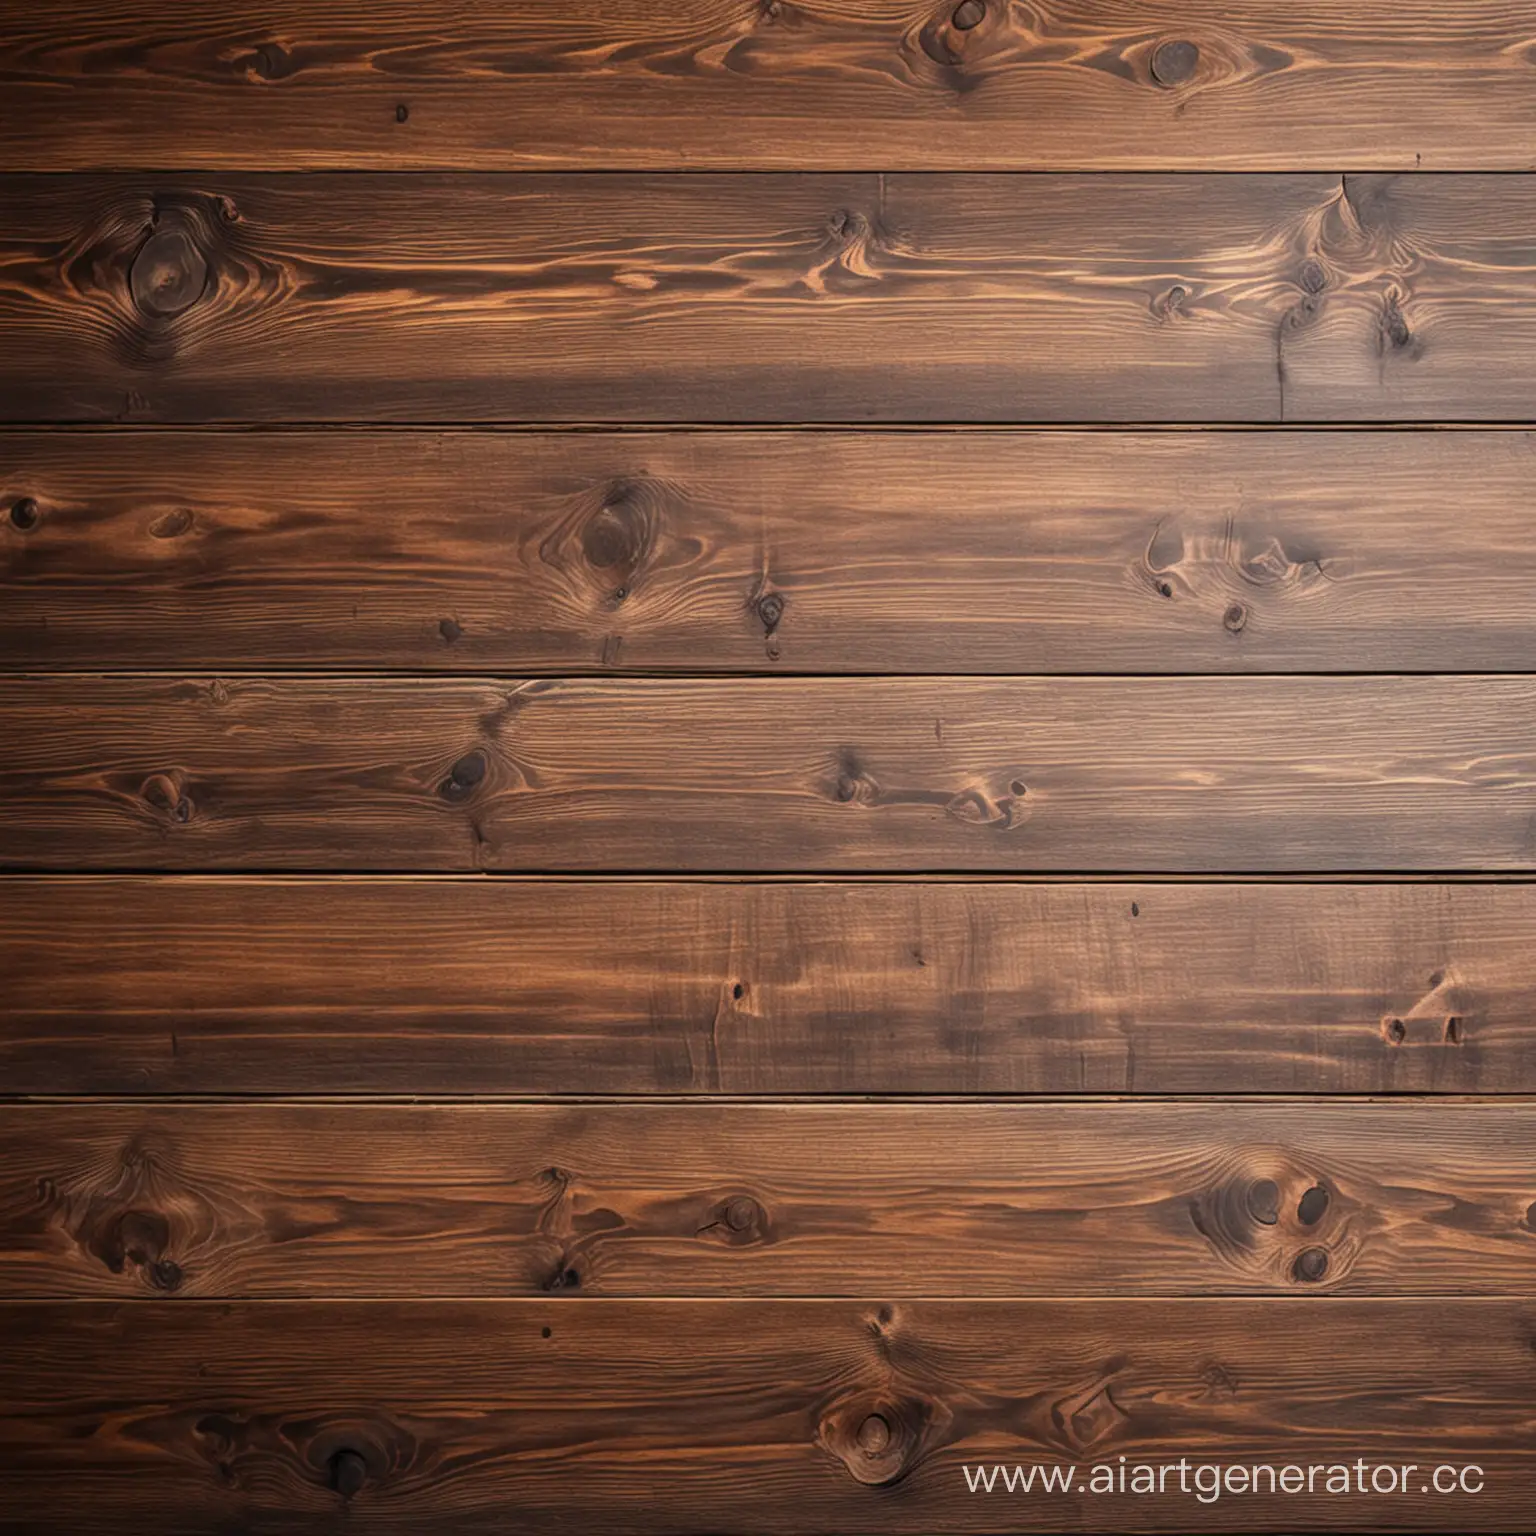 Rustic-Wooden-Table-Background-for-AI-Art